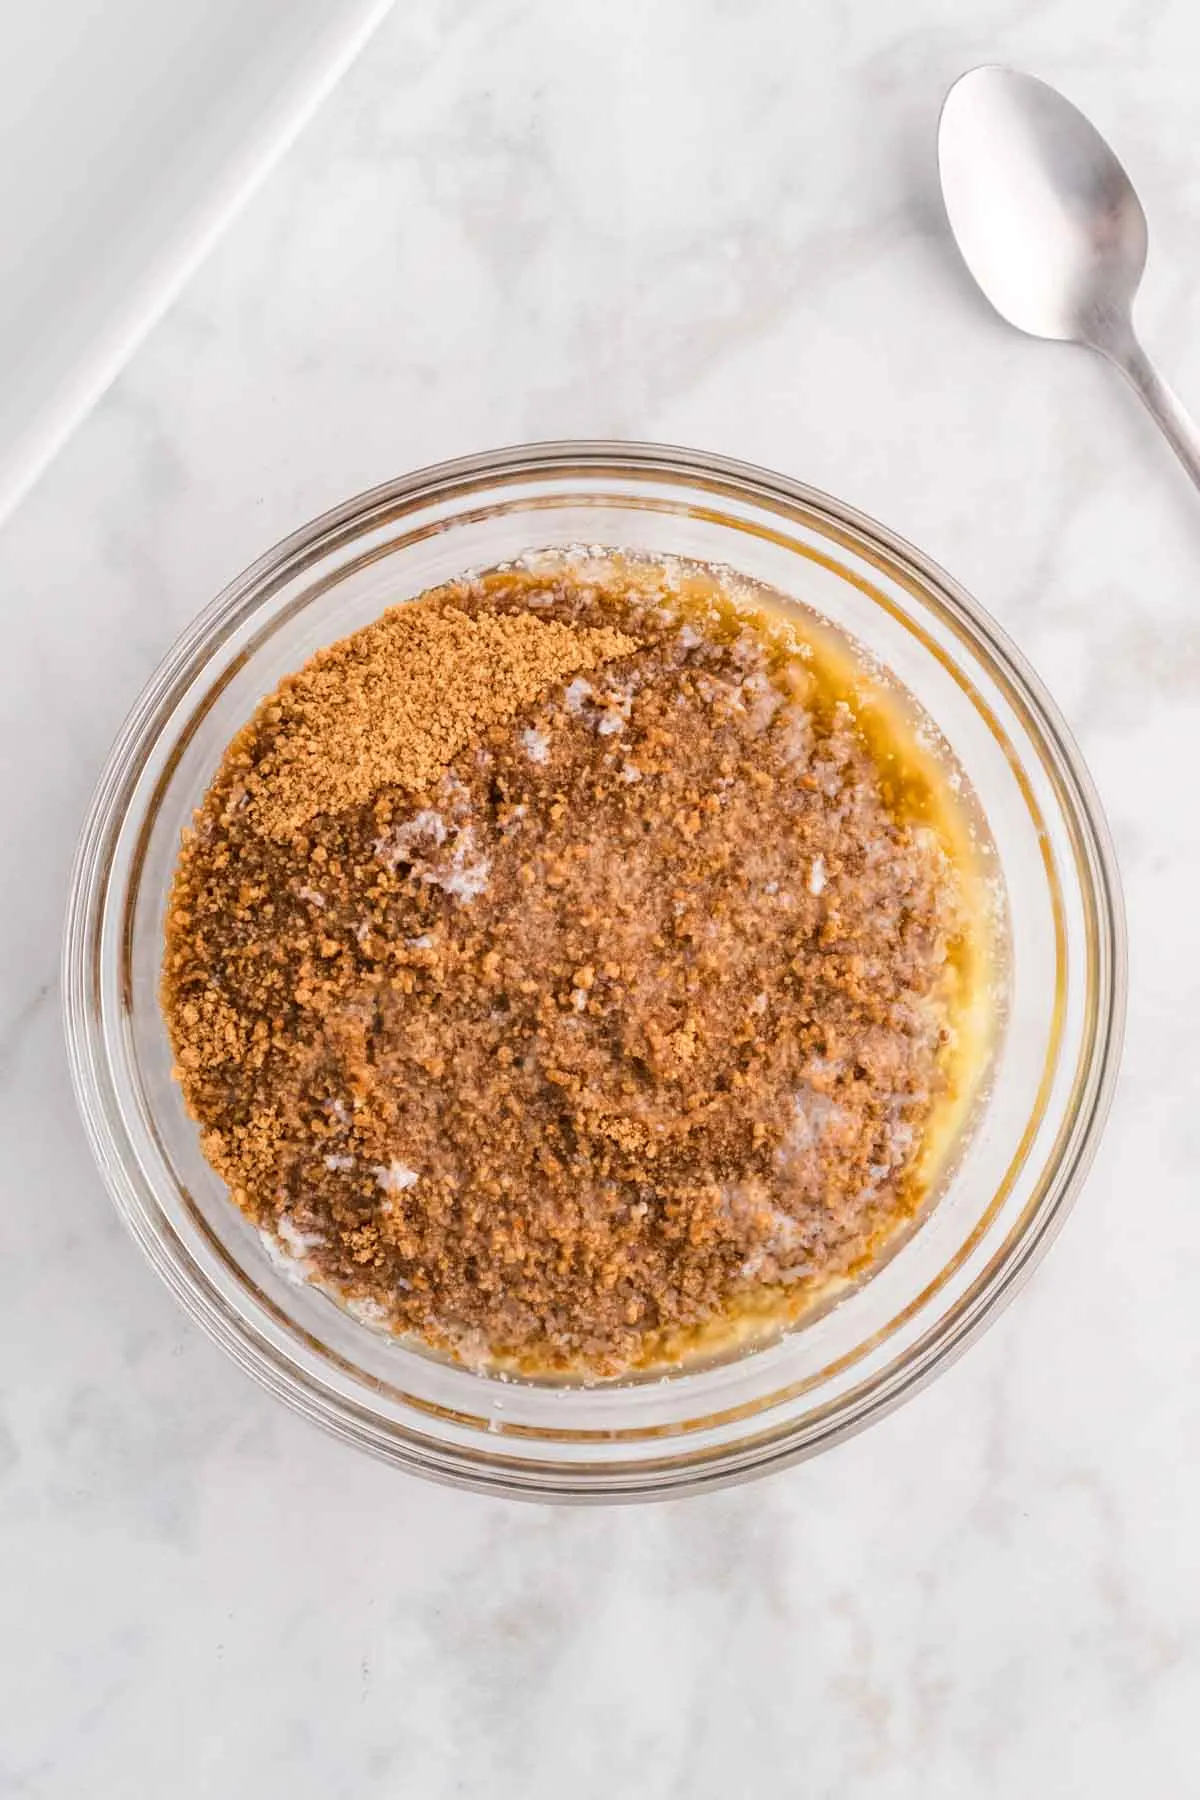 melted butter and gingersnap crumbs in a bowl